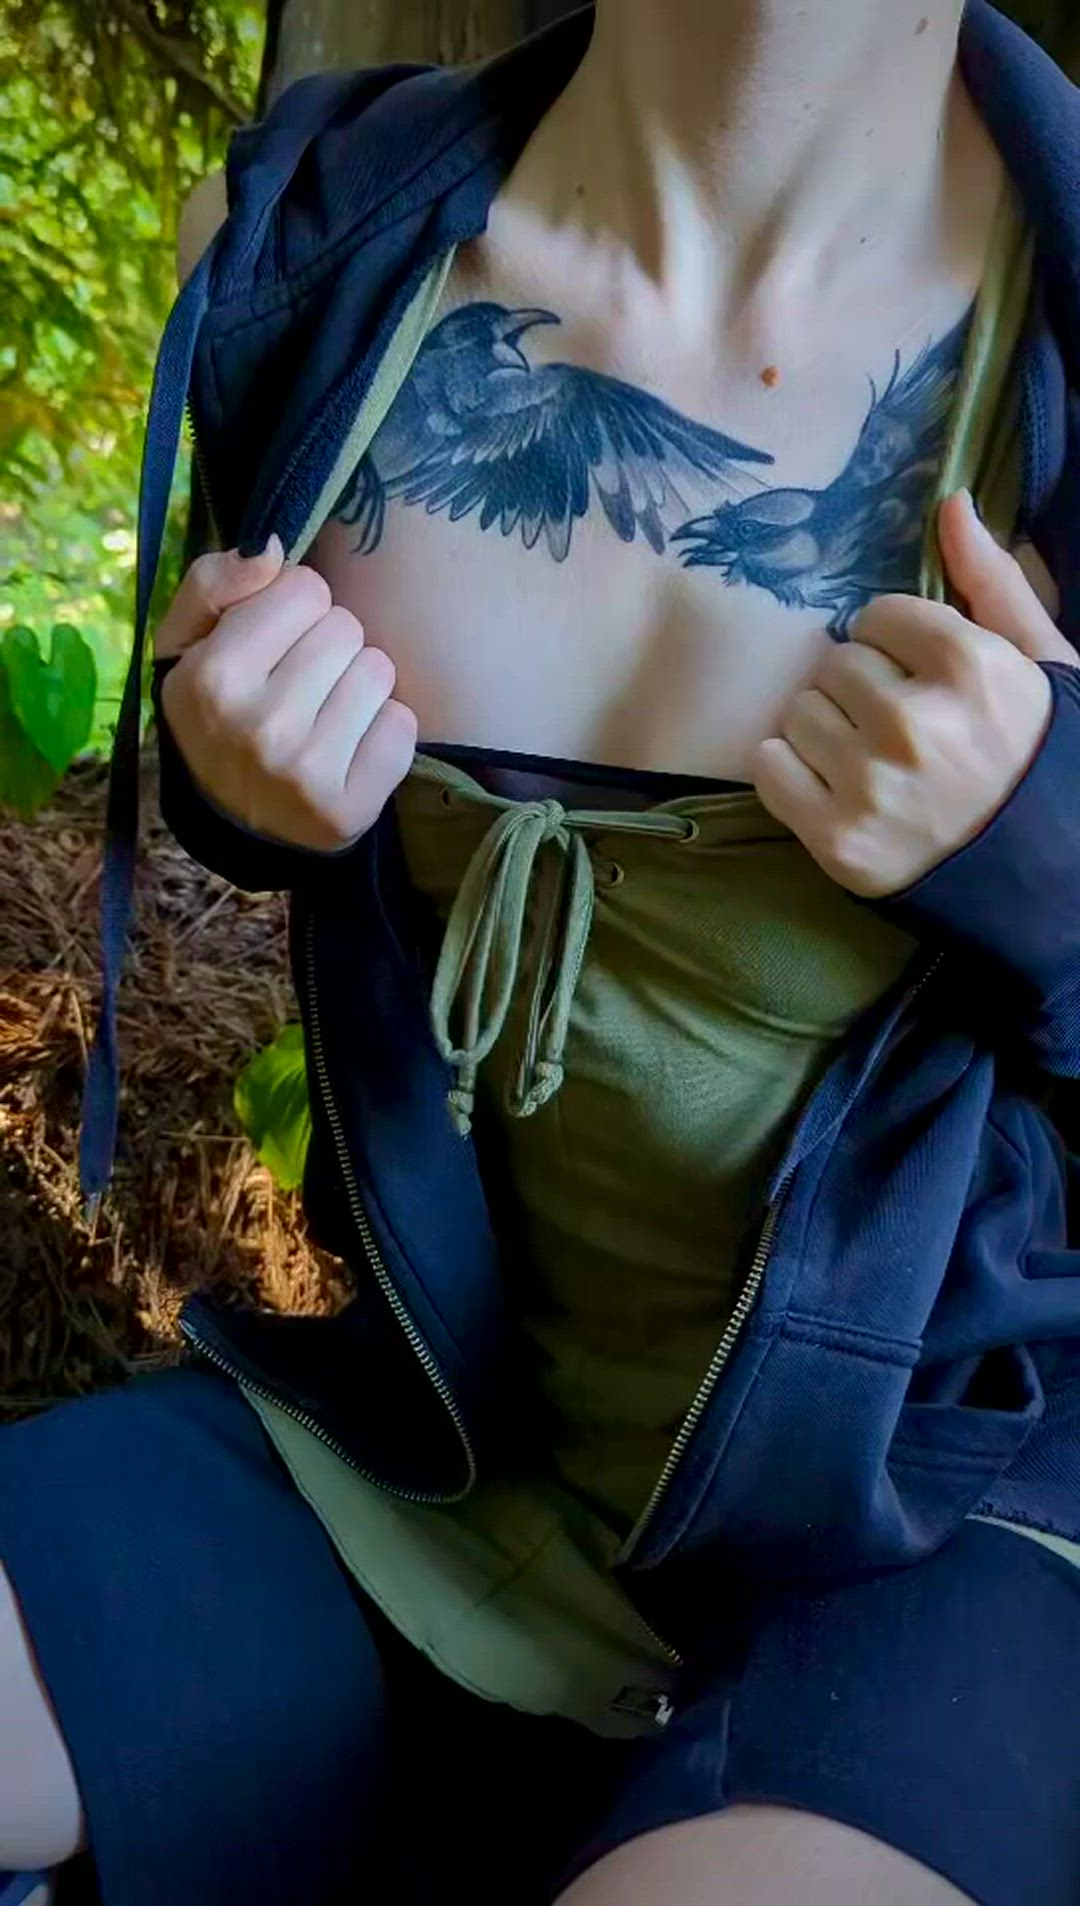 Tits porn video with onlyfans model graveyardnymph <strong>@graveyard_nymph</strong>